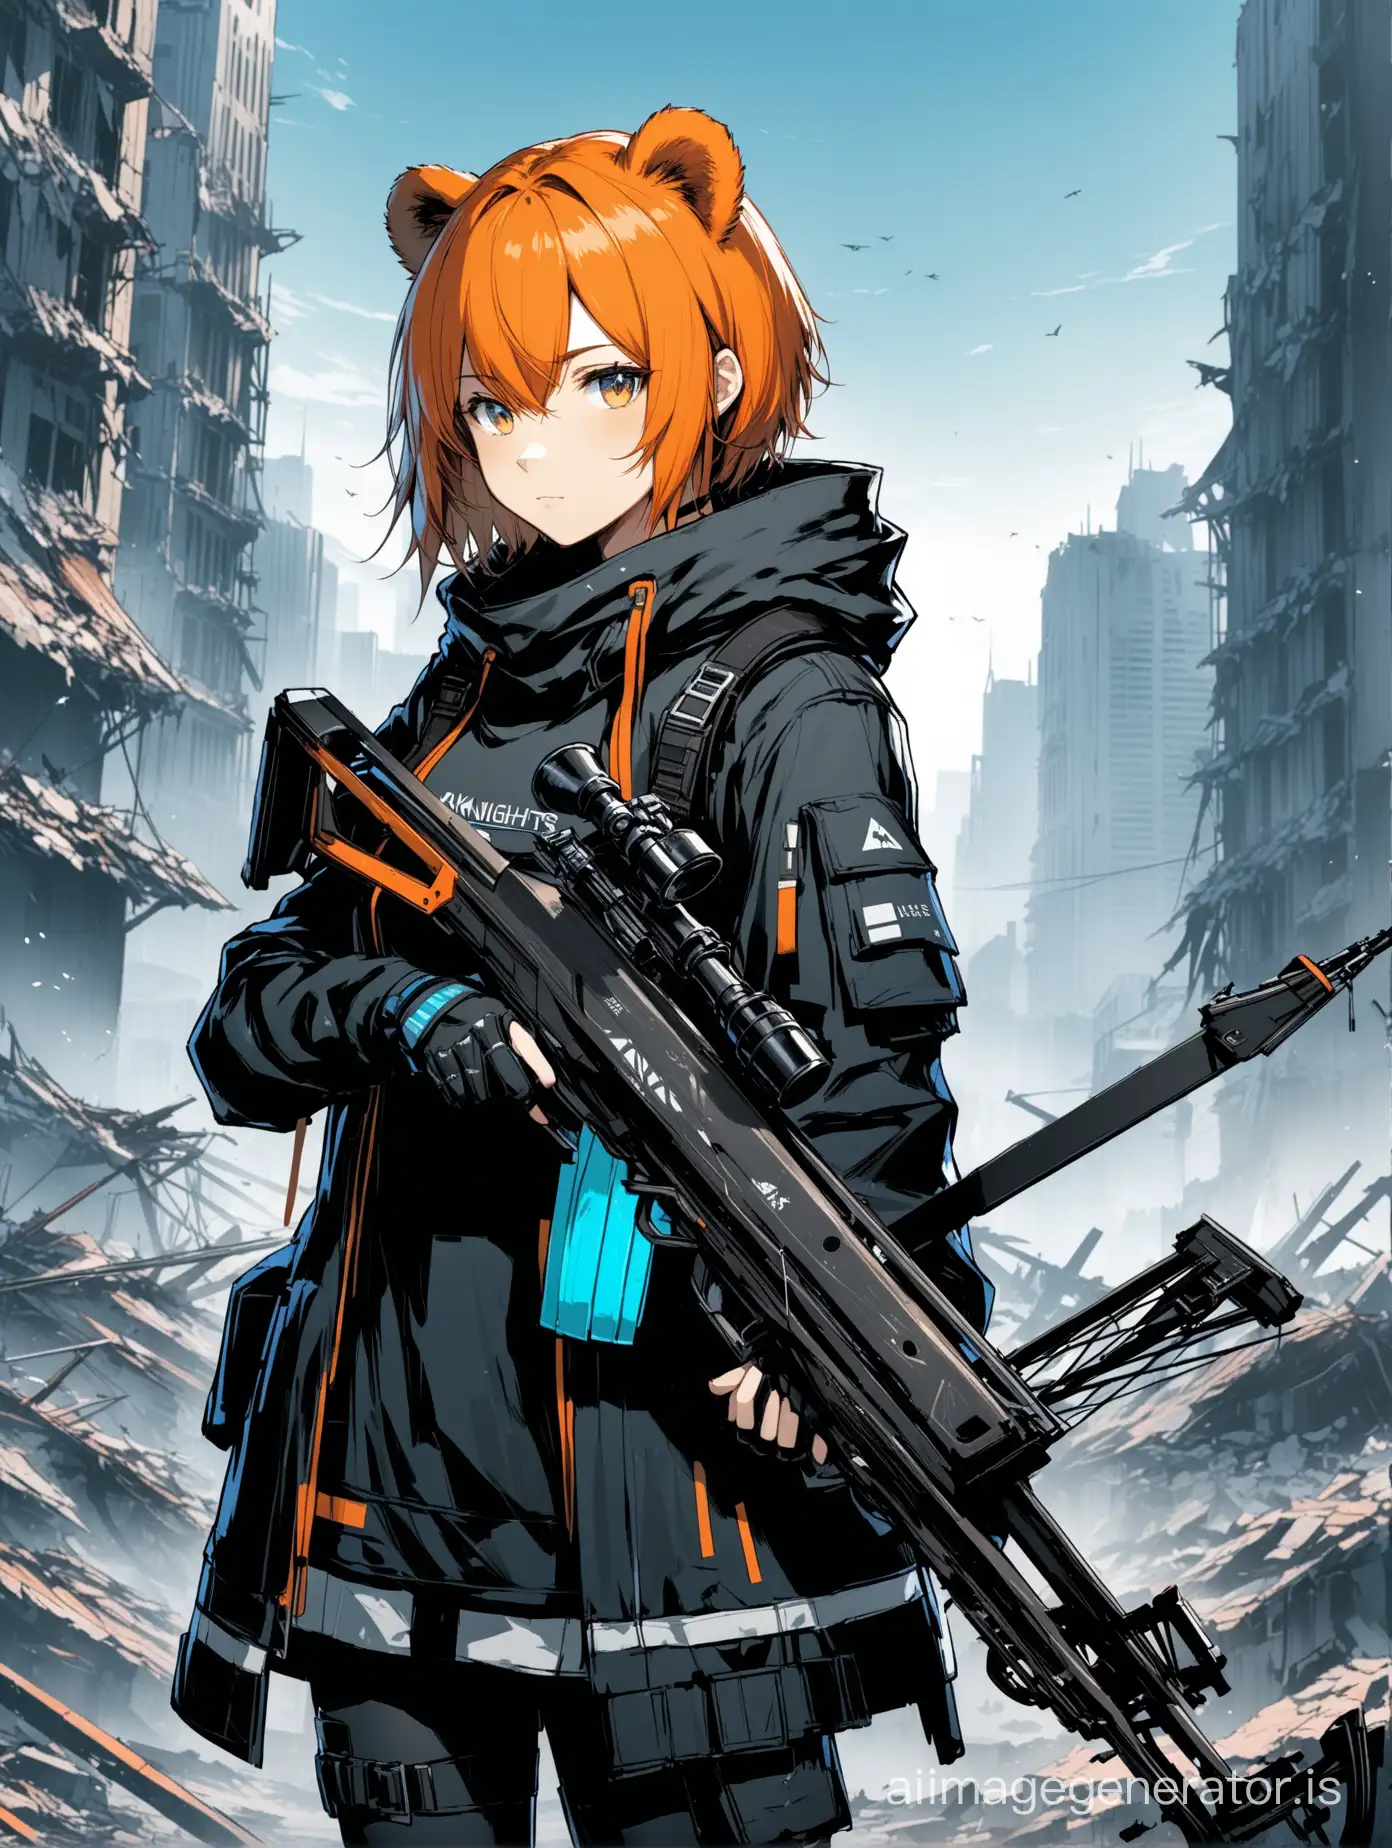 Arknights-Ursus-Girl-with-Crossbow-in-Destroyed-Cityscape